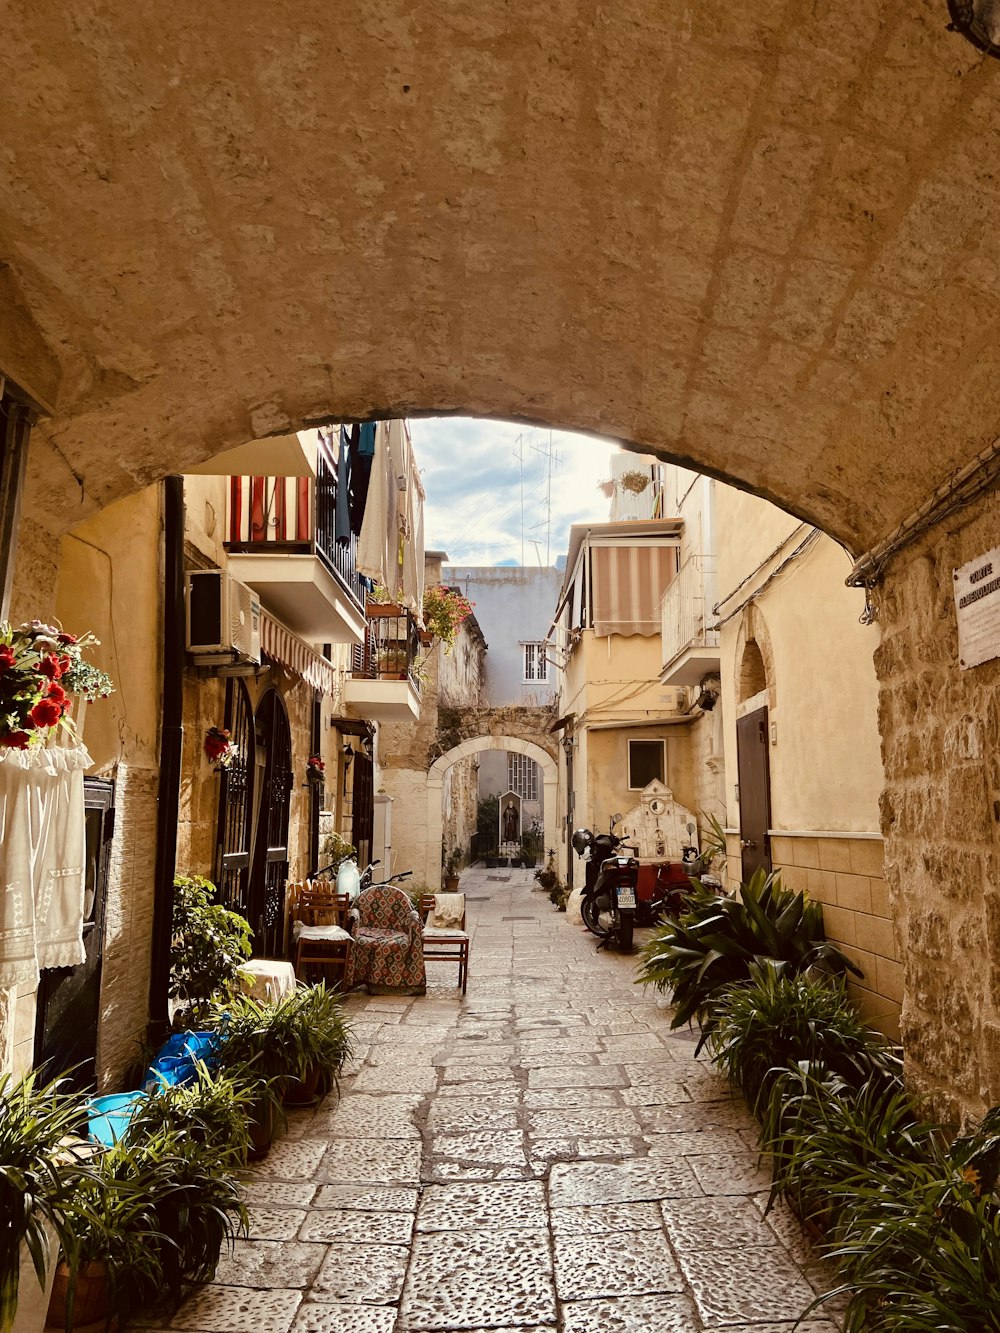 a cobblestone street with a stone arch in the middle